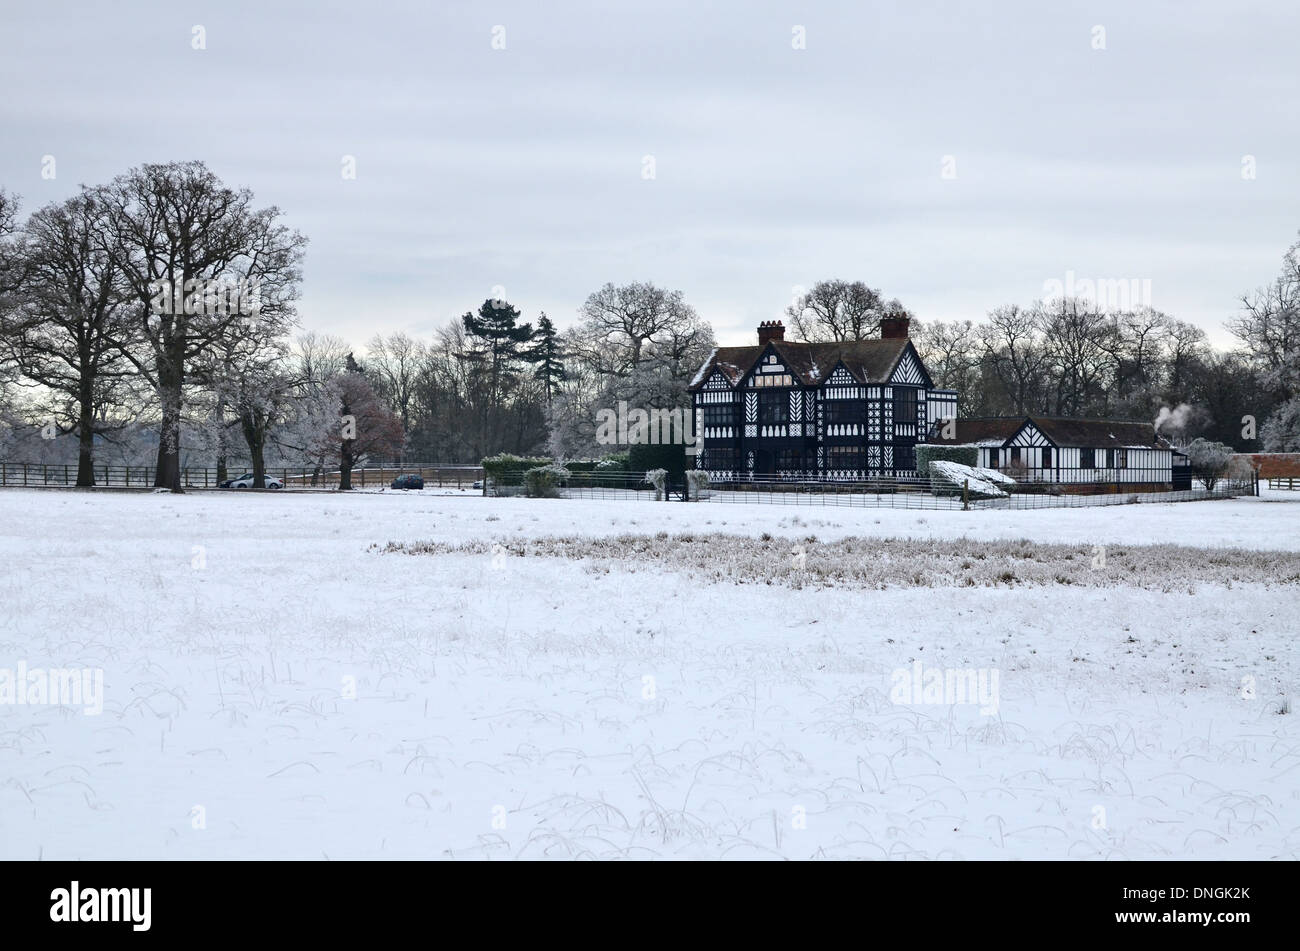 Paris House, Woburn Park on the Duke of Bedford's Estate in the snow Stock Photo